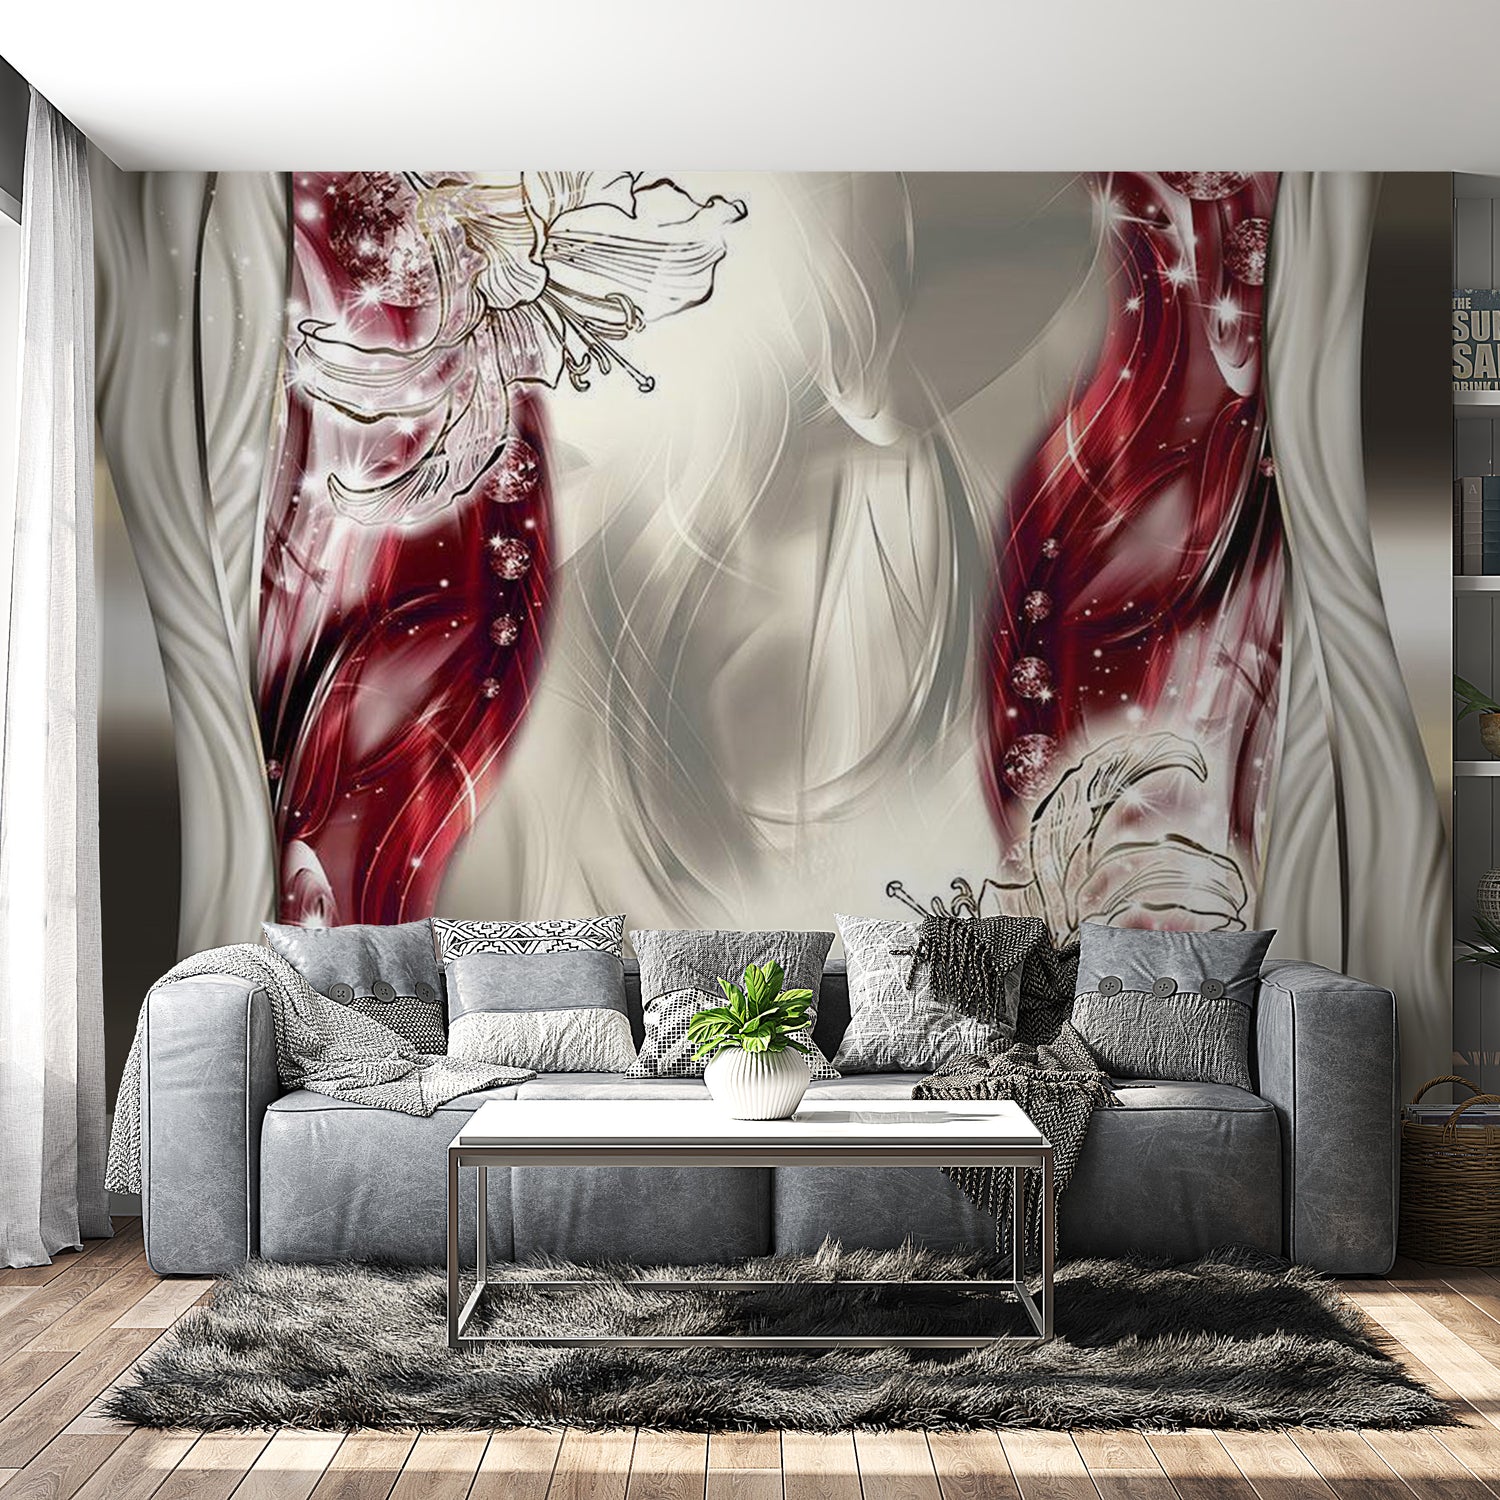 Peel & Stick Floral Wall Mural - Tango Of Colours - Removable Wall Decals